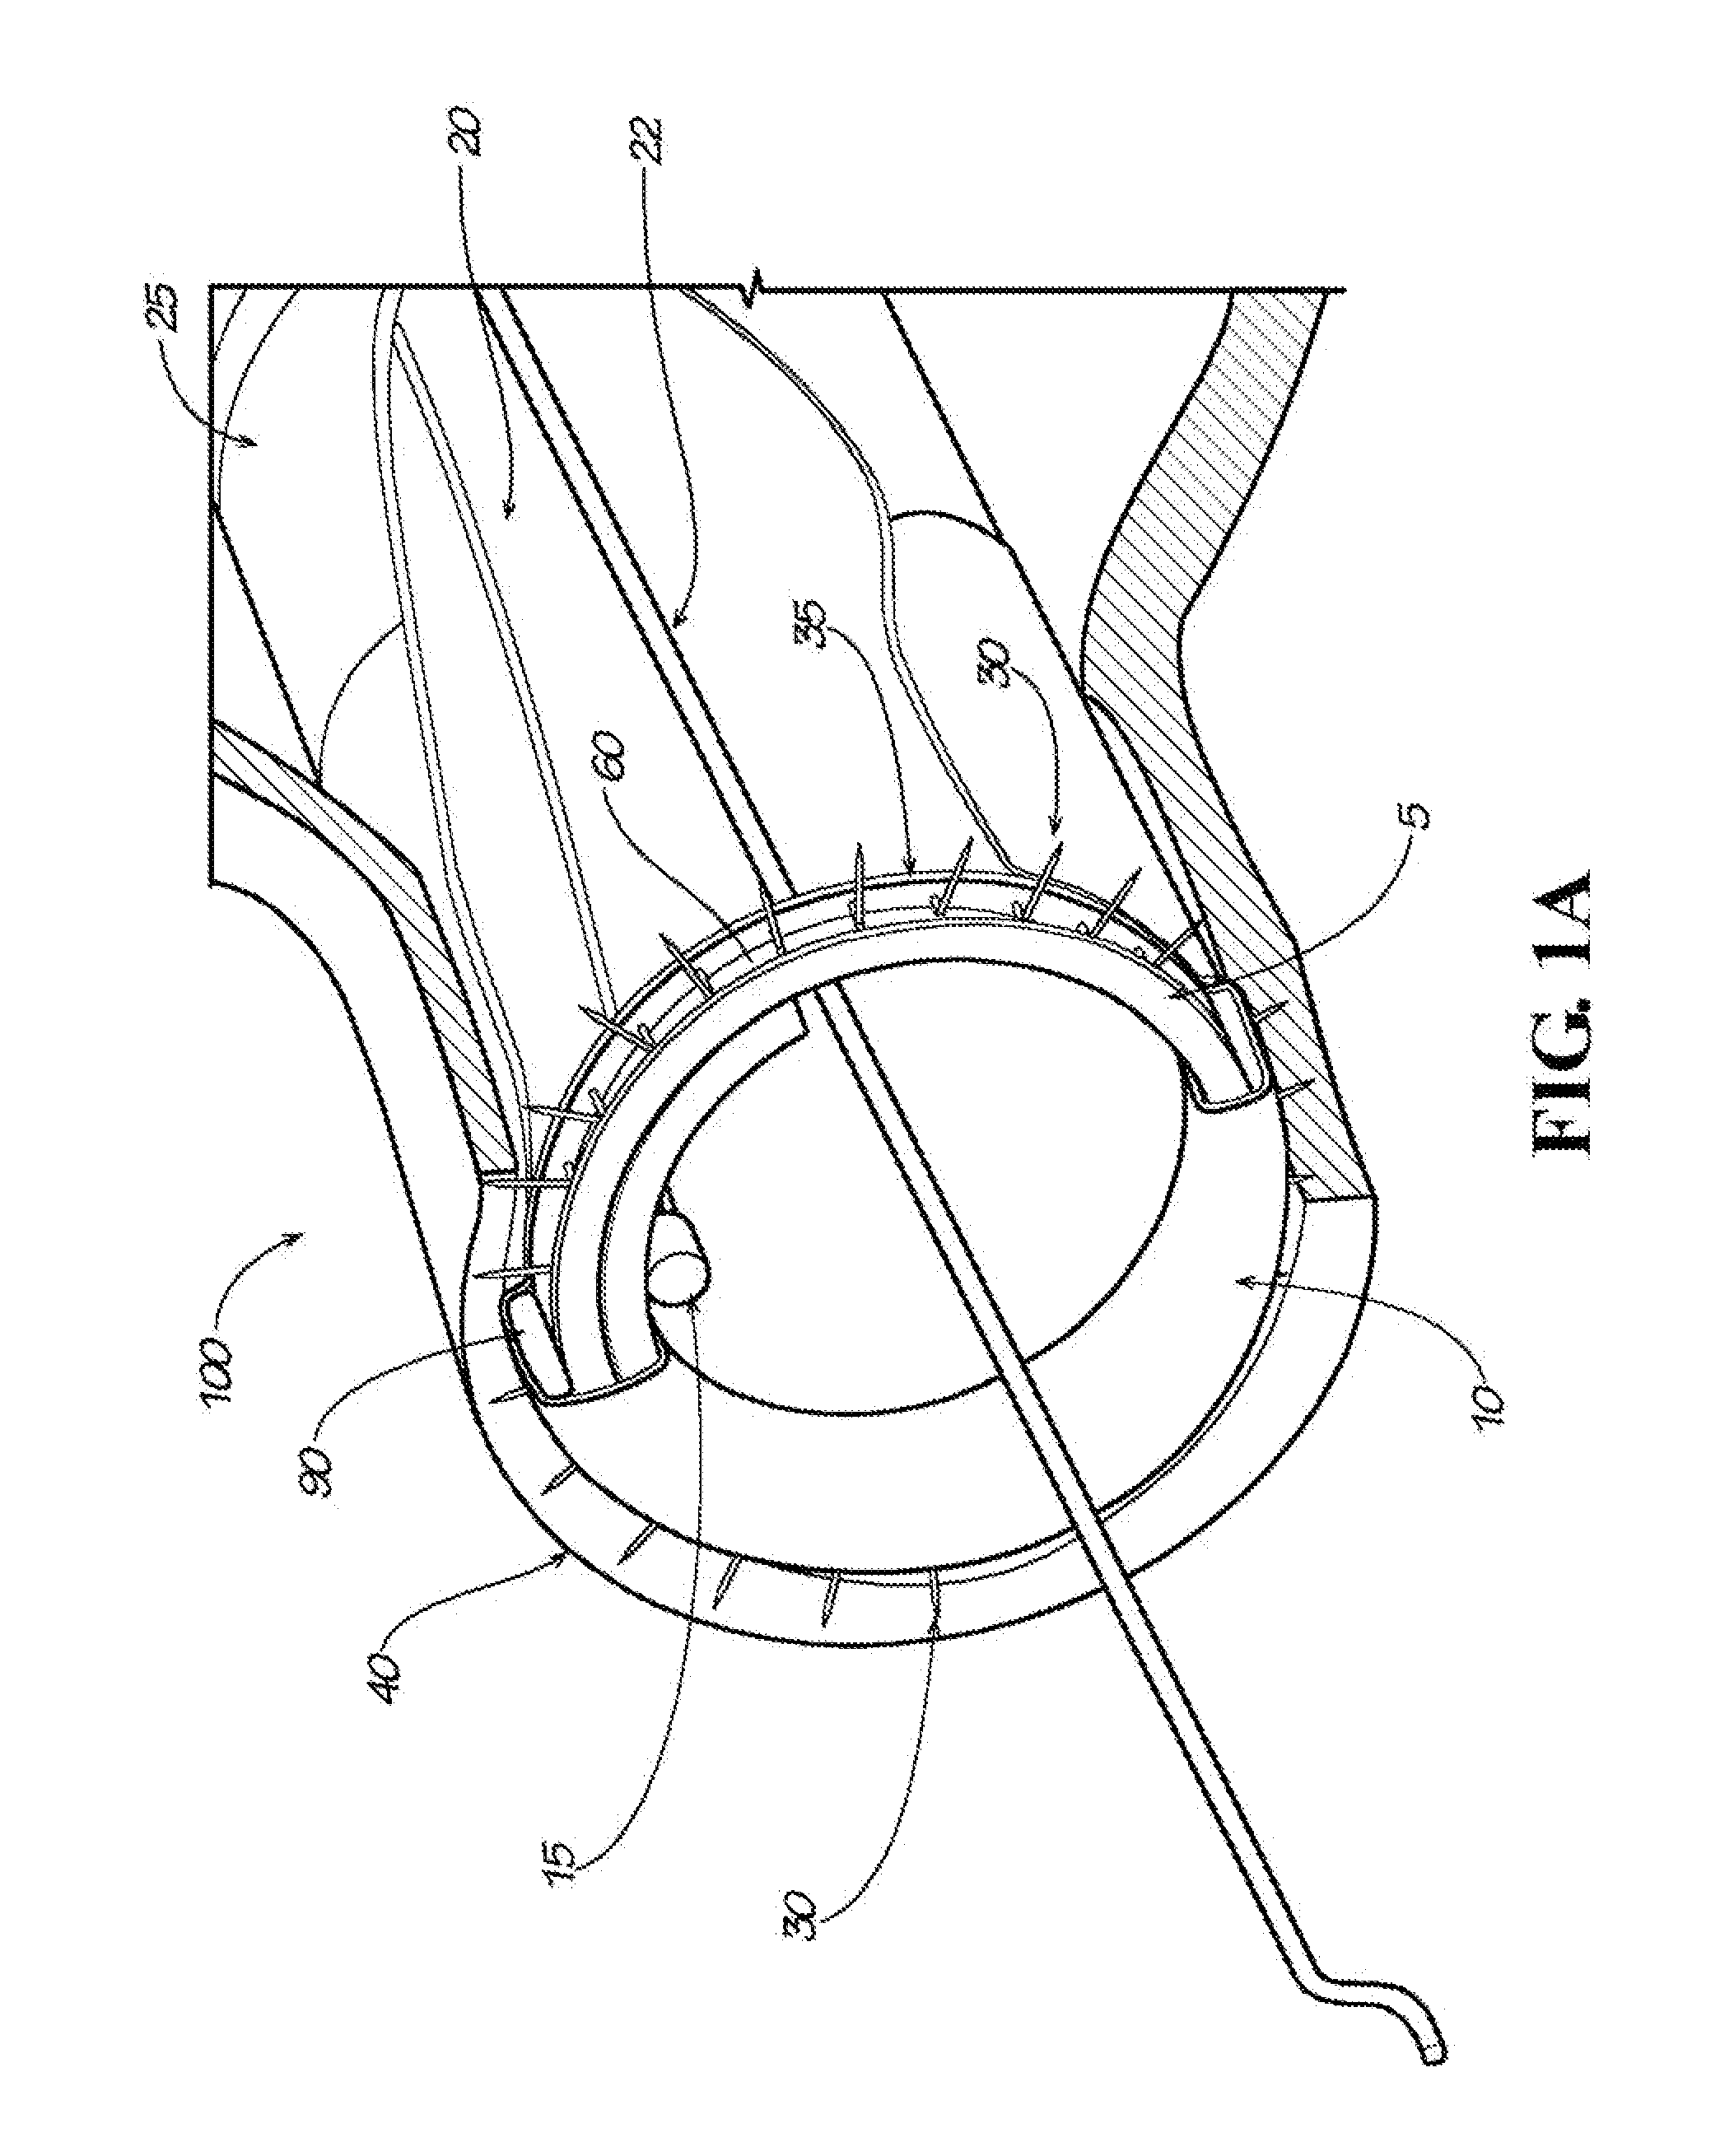 Surgical Implant Devices and Methods for their Manufacture and Use